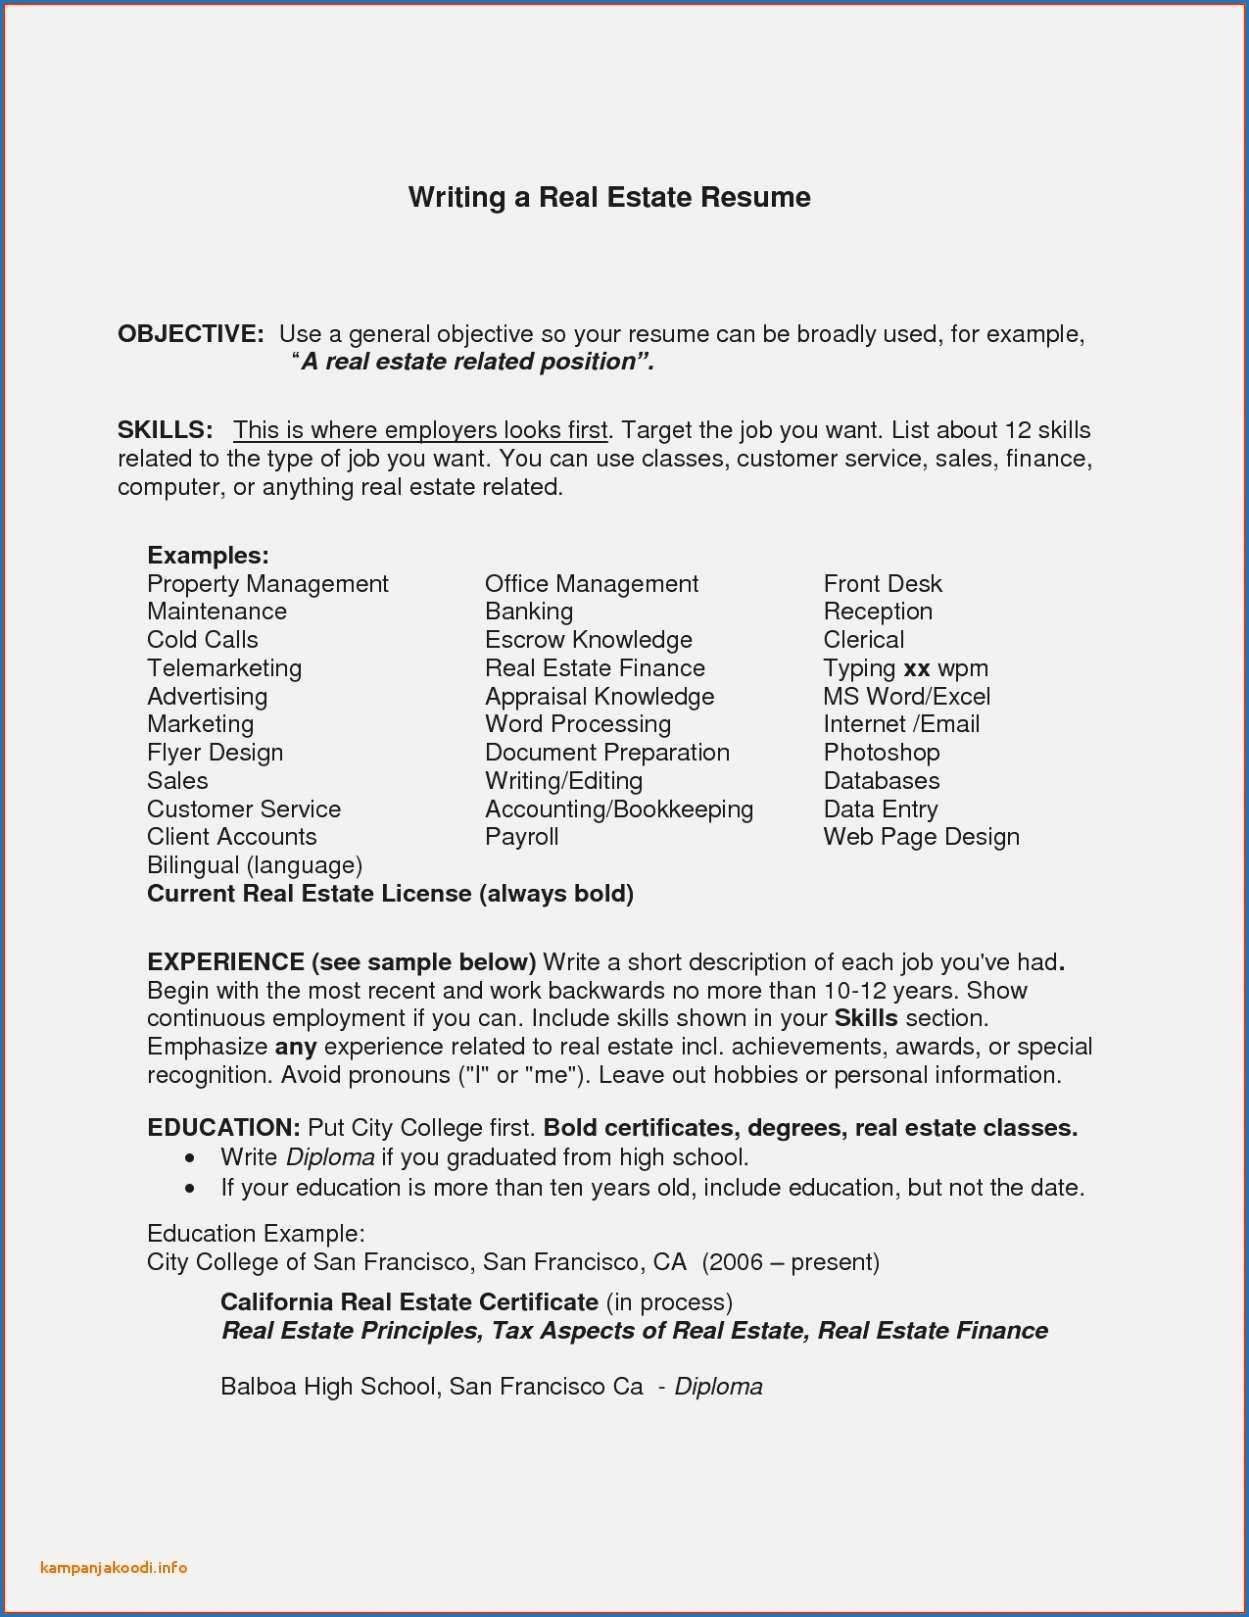 Sample Resume with Awards and Recognition Word Template Certificate Of Recognition Lovely Word 2007 Resume …